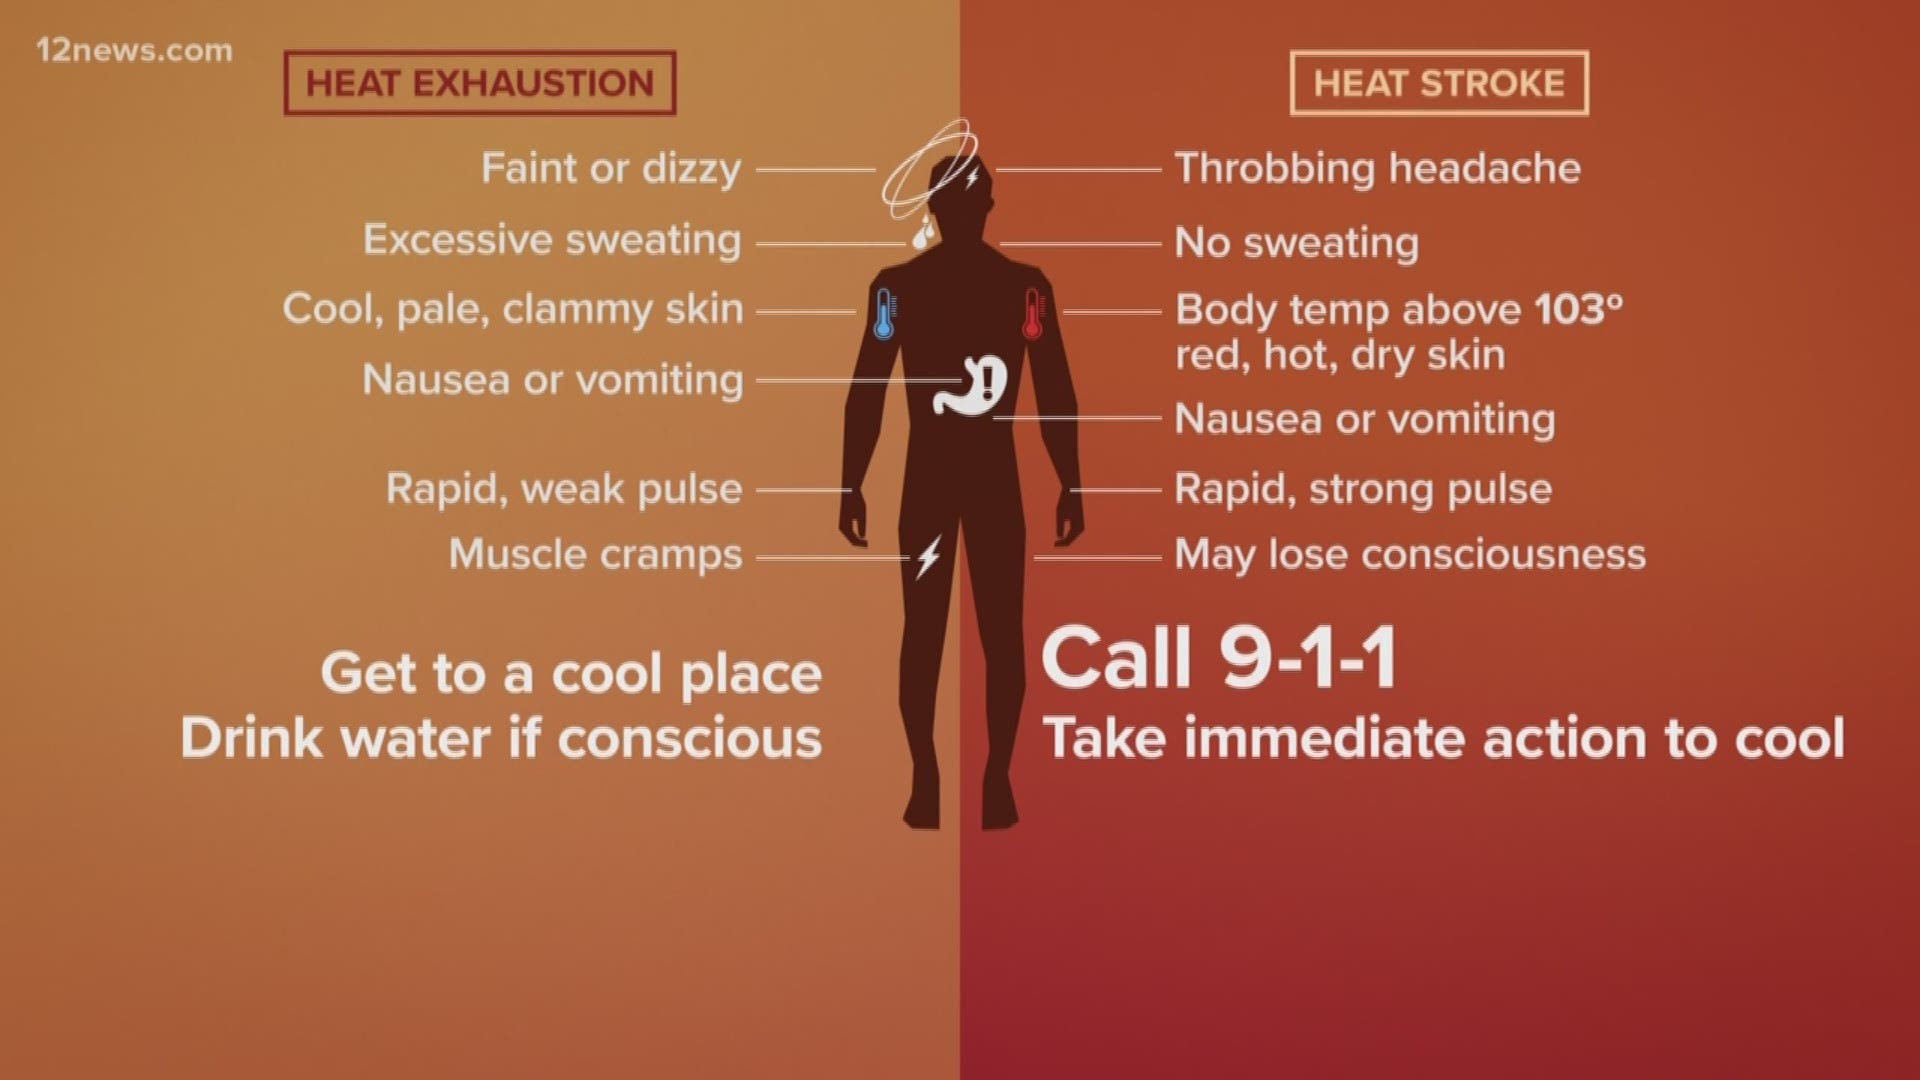 Last month marked the hottest July ever recorded in the world and one of the hottest on record for the Valley. We explain the difference between heat exhaustion and heatstroke. We also give you five ways to avoid heat injury.